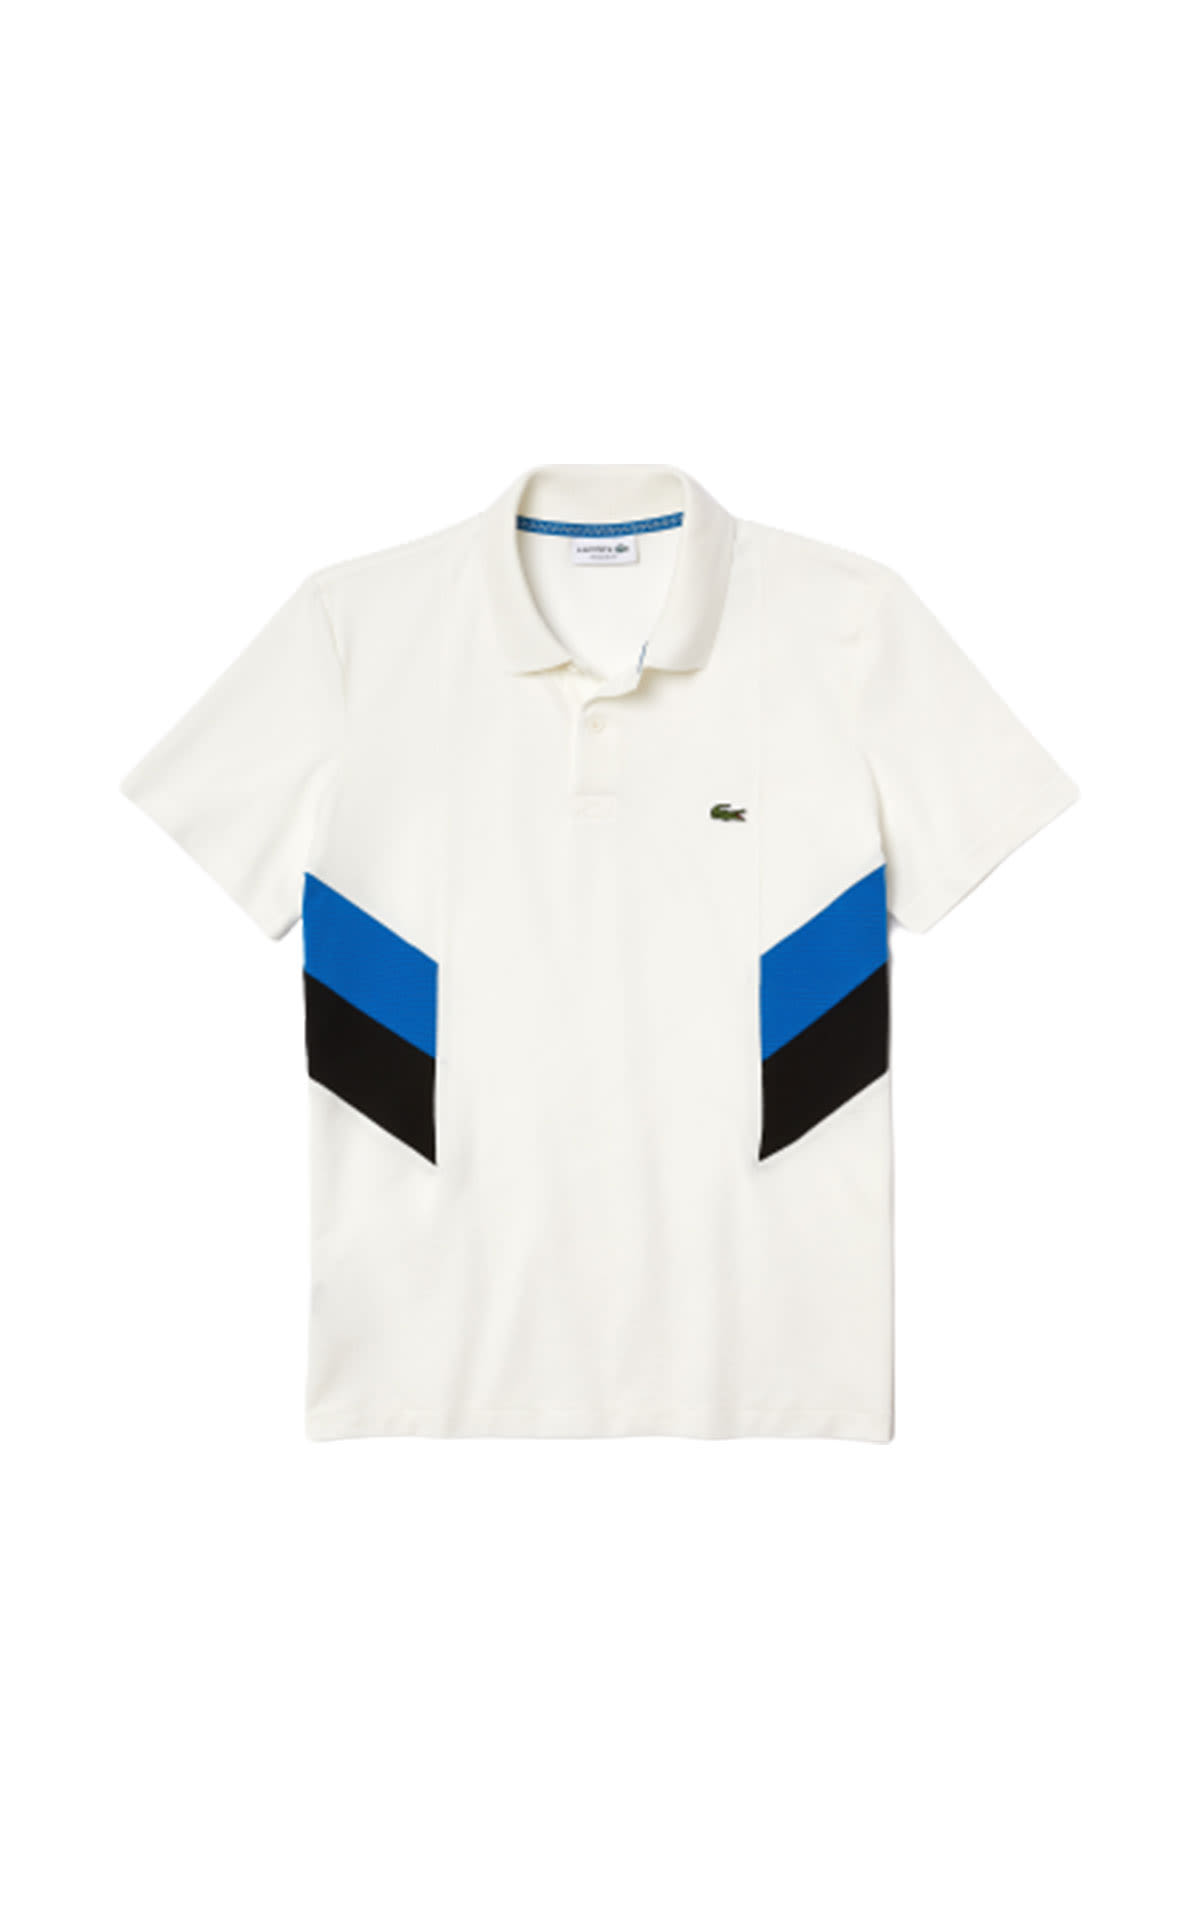 Lacoste Regular fit ultra-light cotton polo shirt from Bicester Village